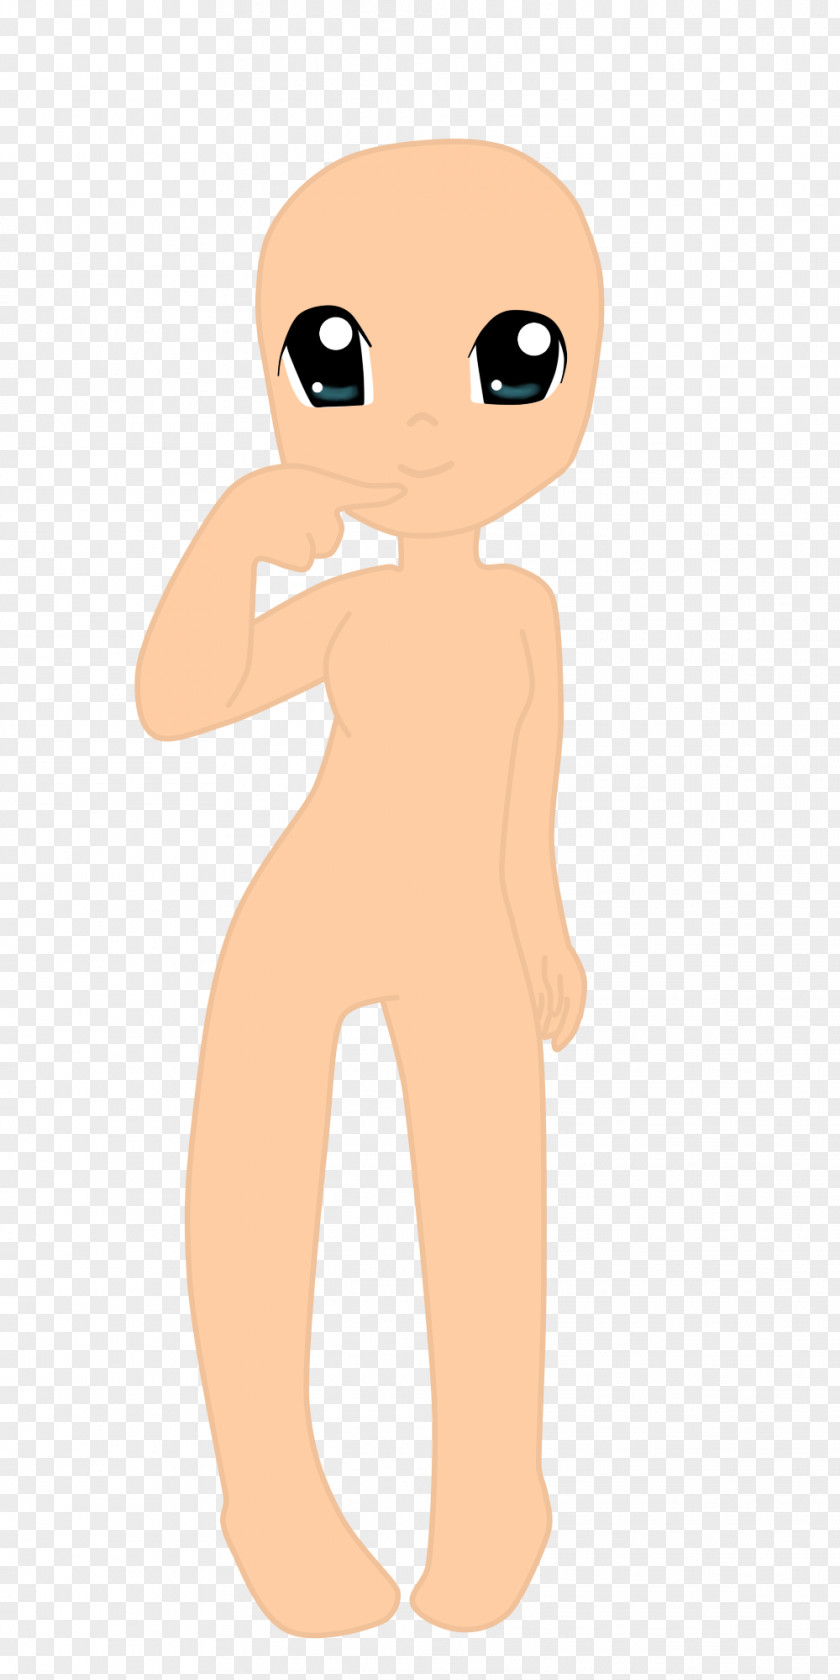 Arm Thumb Face Shoulder Joint PNG